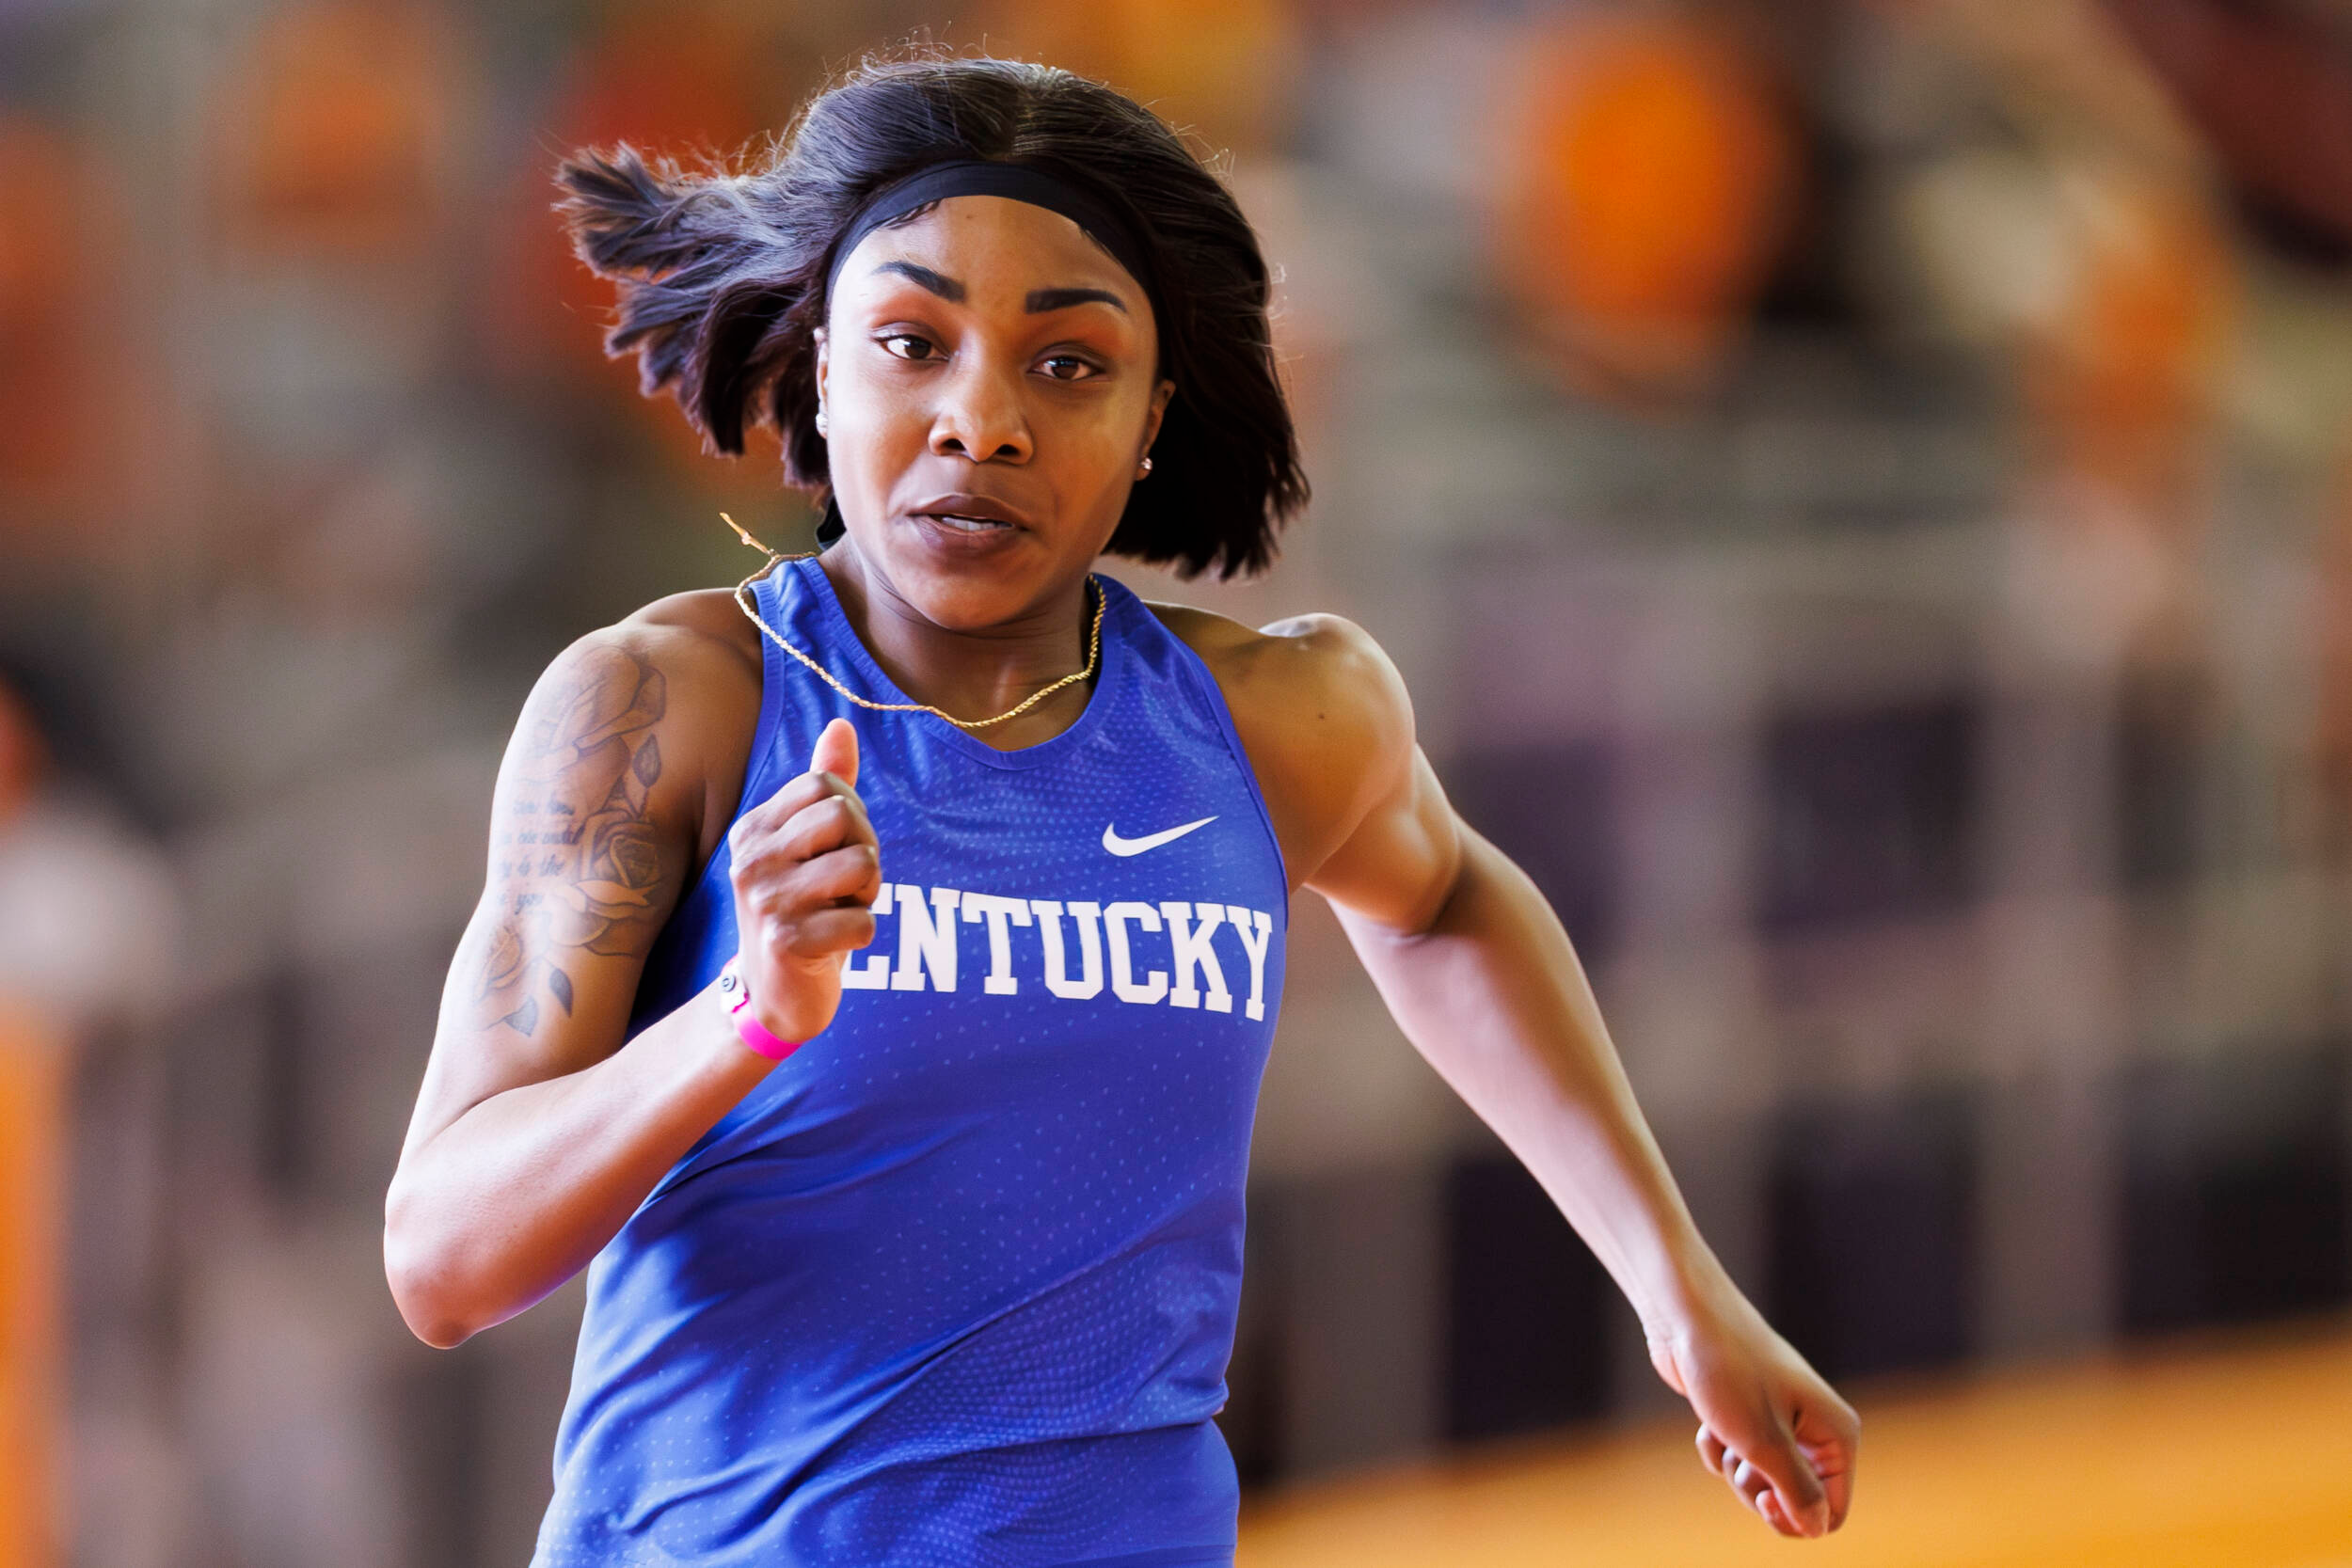 Kentucky Track & Field Sees Four New Personal Bests On Friday